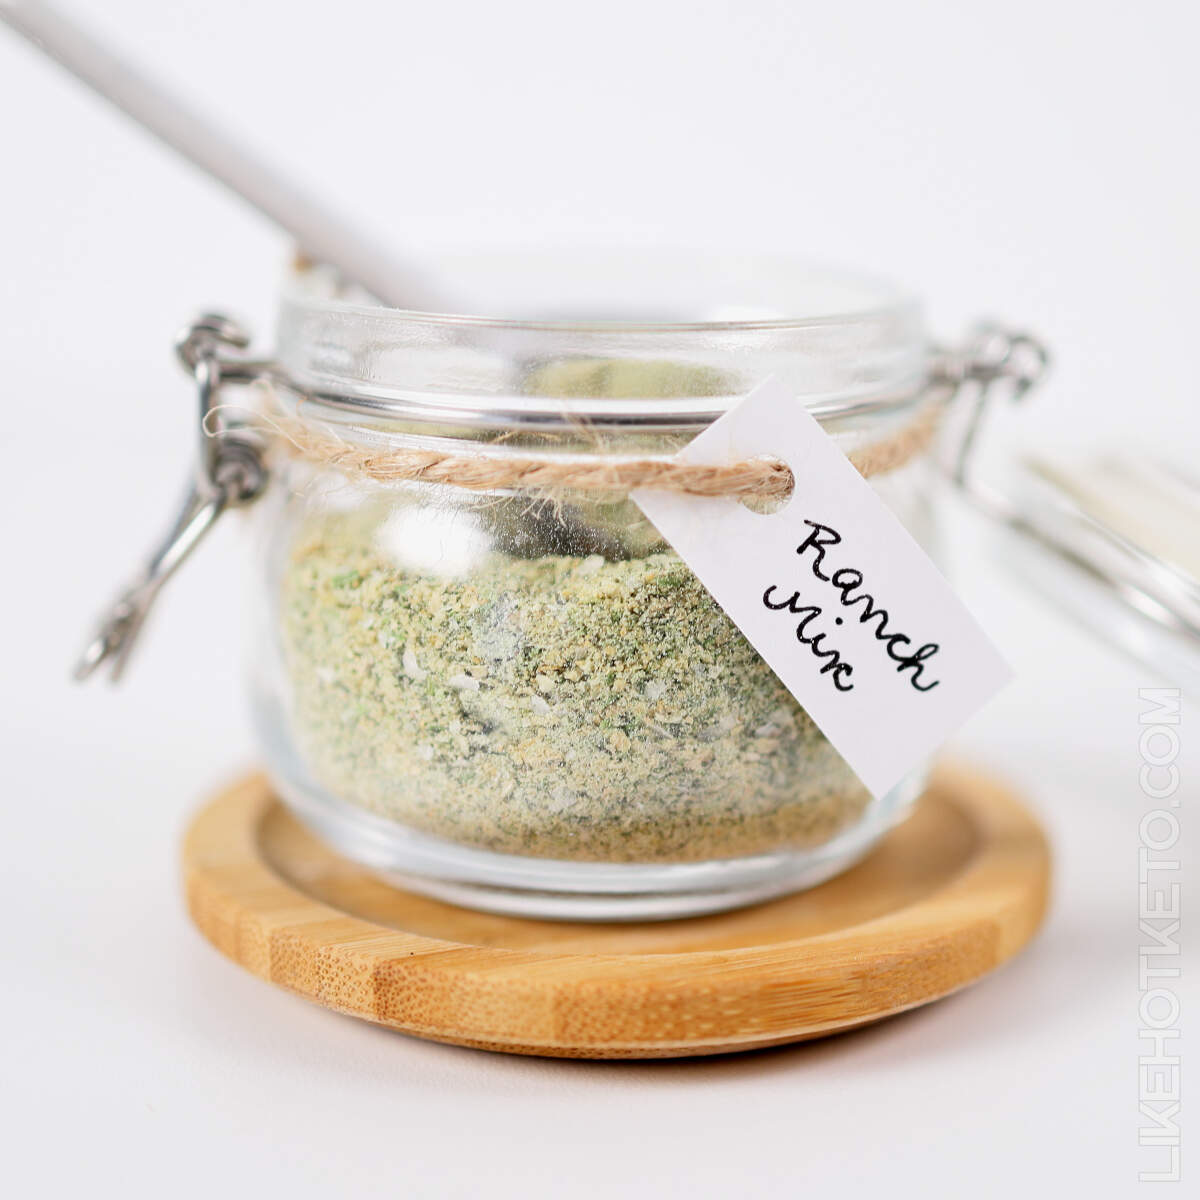 Dry ranch mix powder in mason jar with measuring spoon.